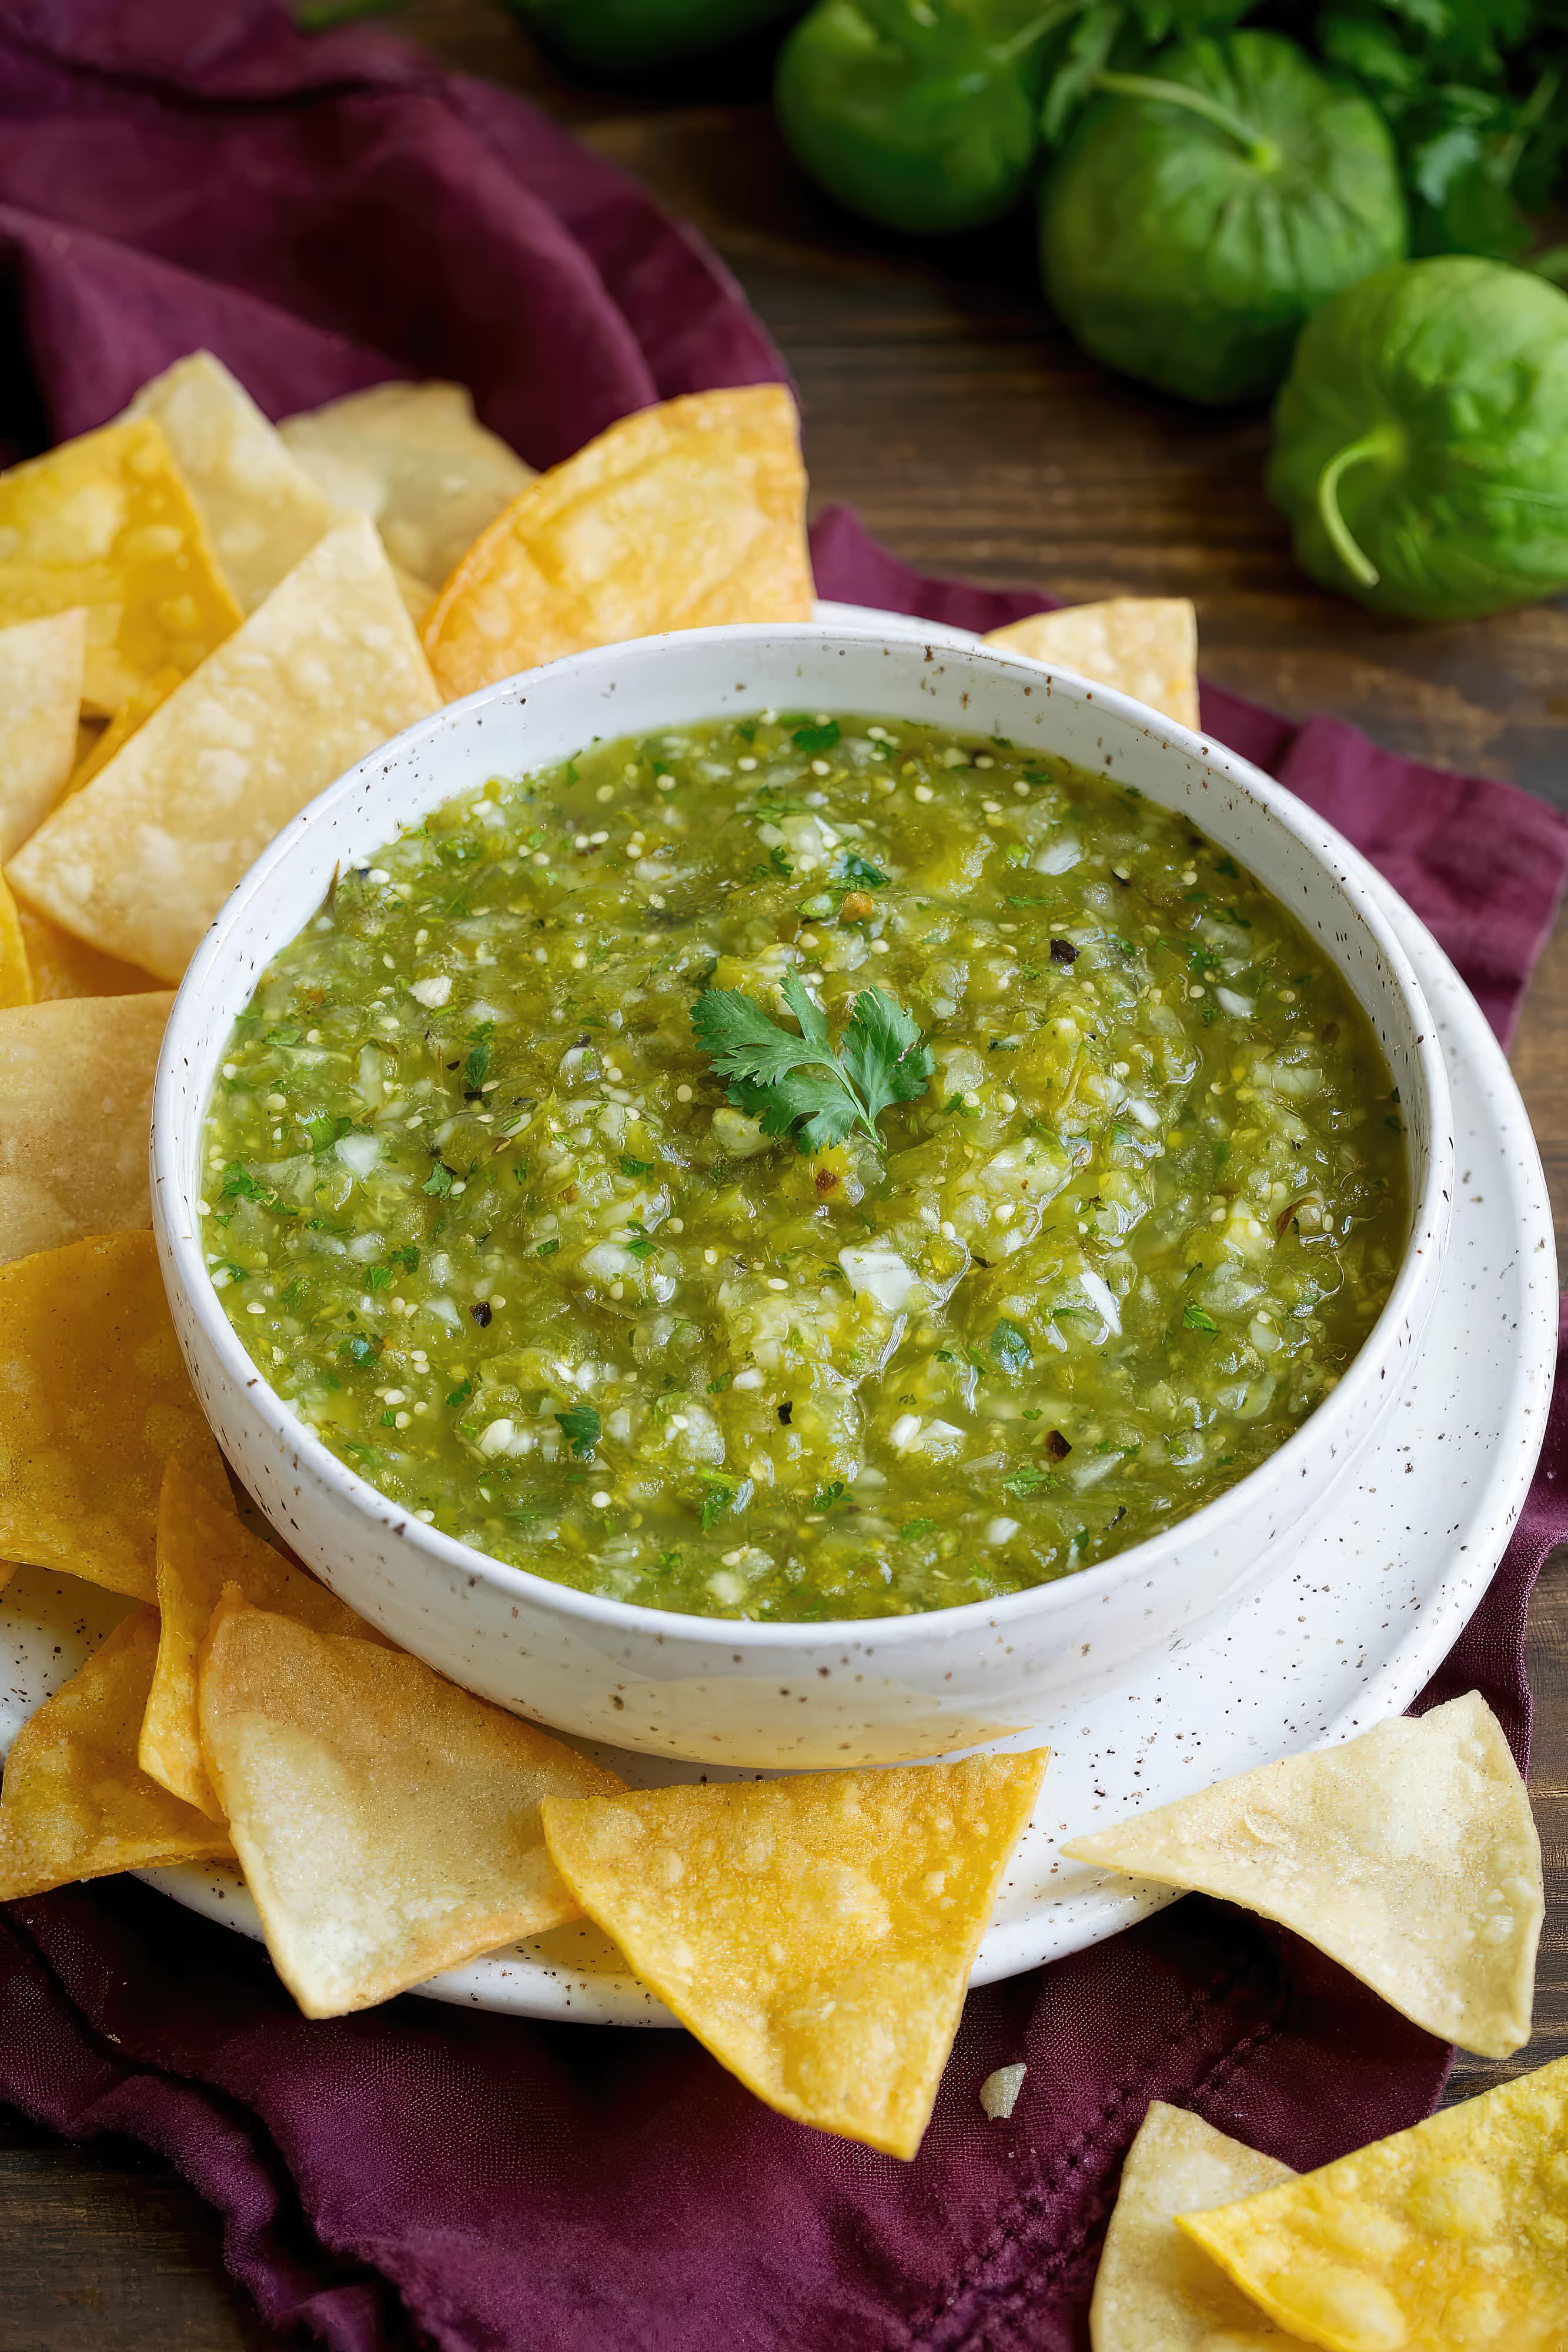 A bowl of tangy green salsa with crispy tortilla chips on the side